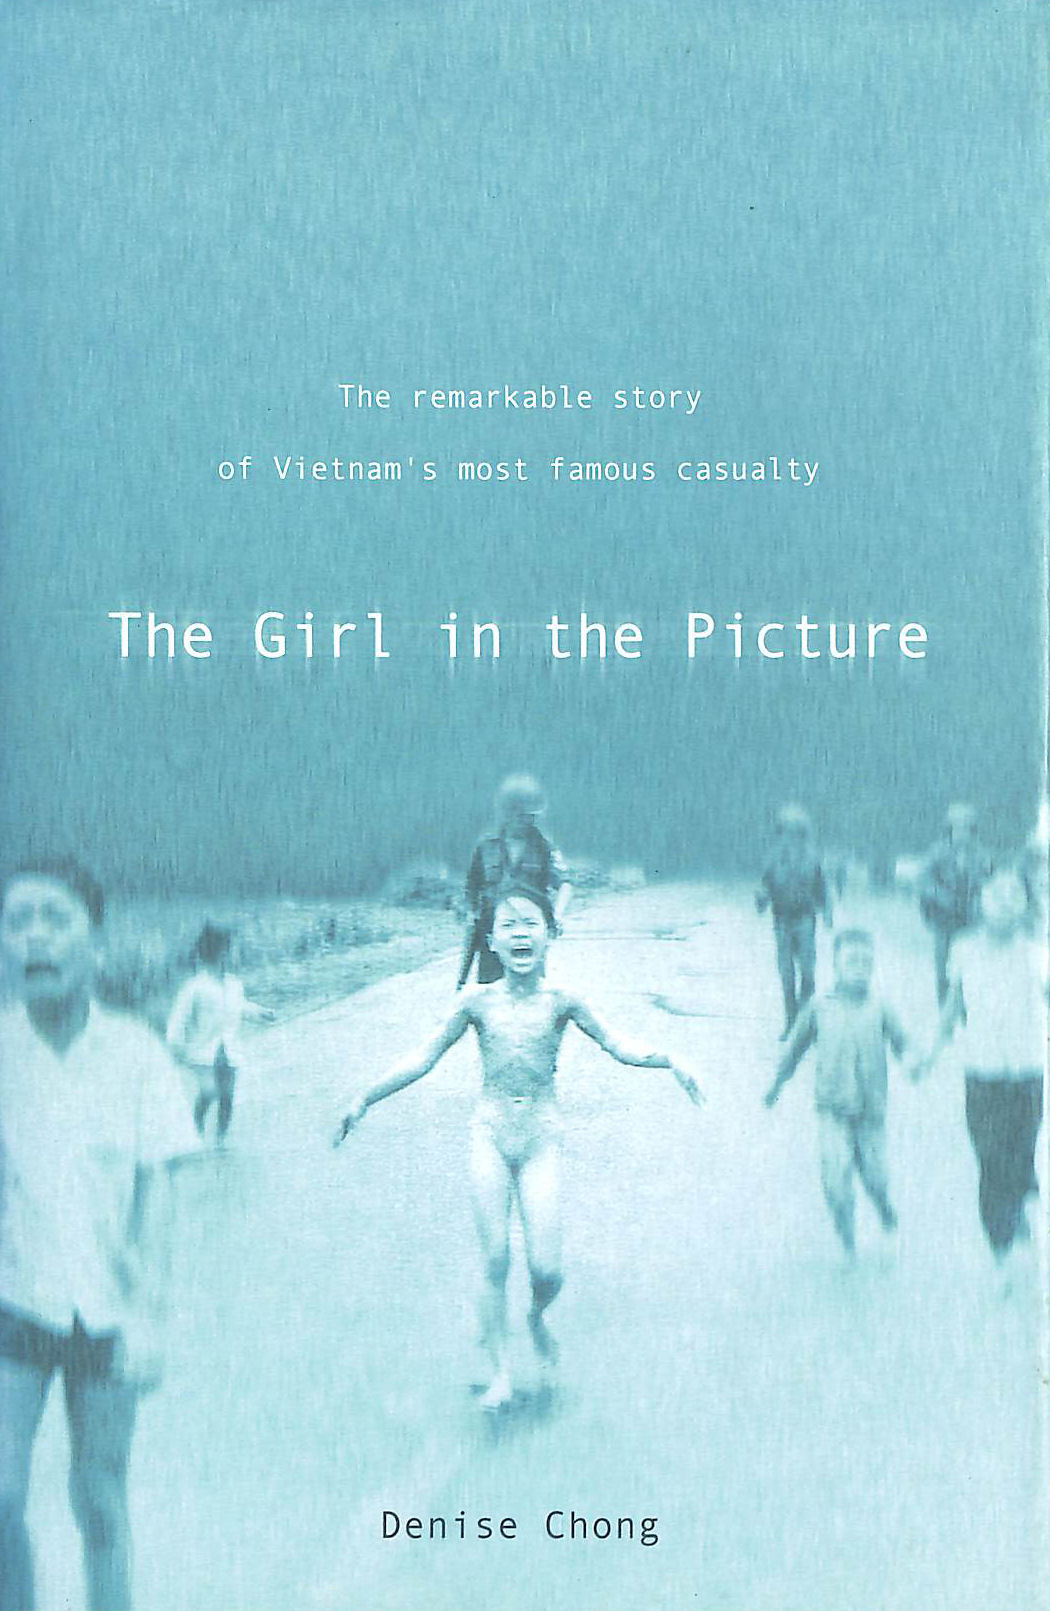 CHONG, DENISE - The Girl In The Picture: The Remarkable Story Of Vietnam's Most Famous Casualty